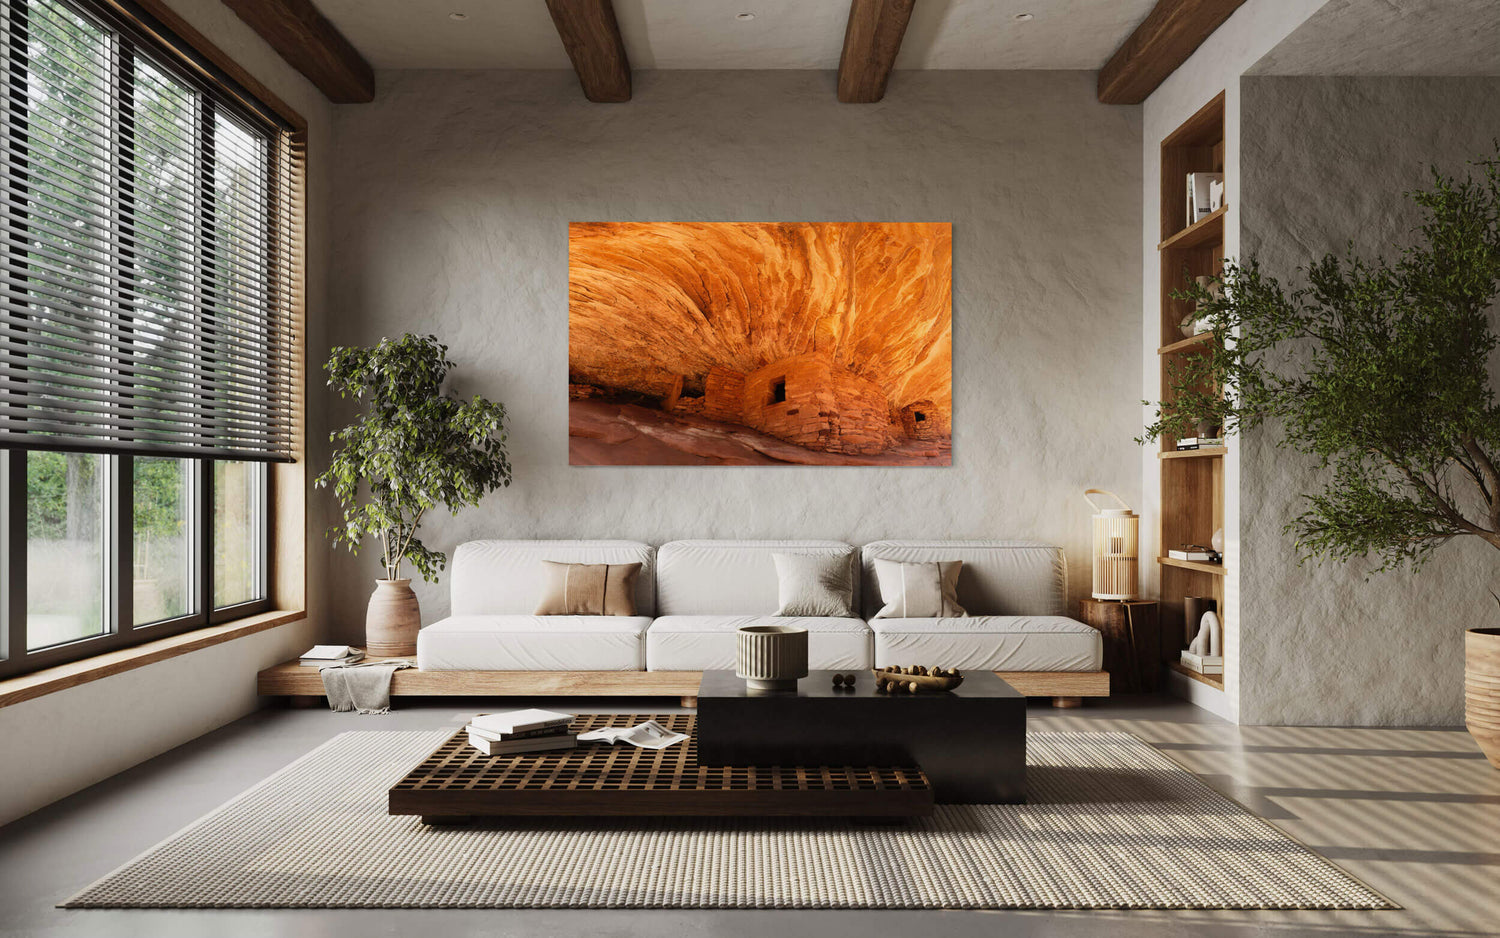 A picture of the House on Fire Anasazi dwelling in Bears Ears hangs in a living room.